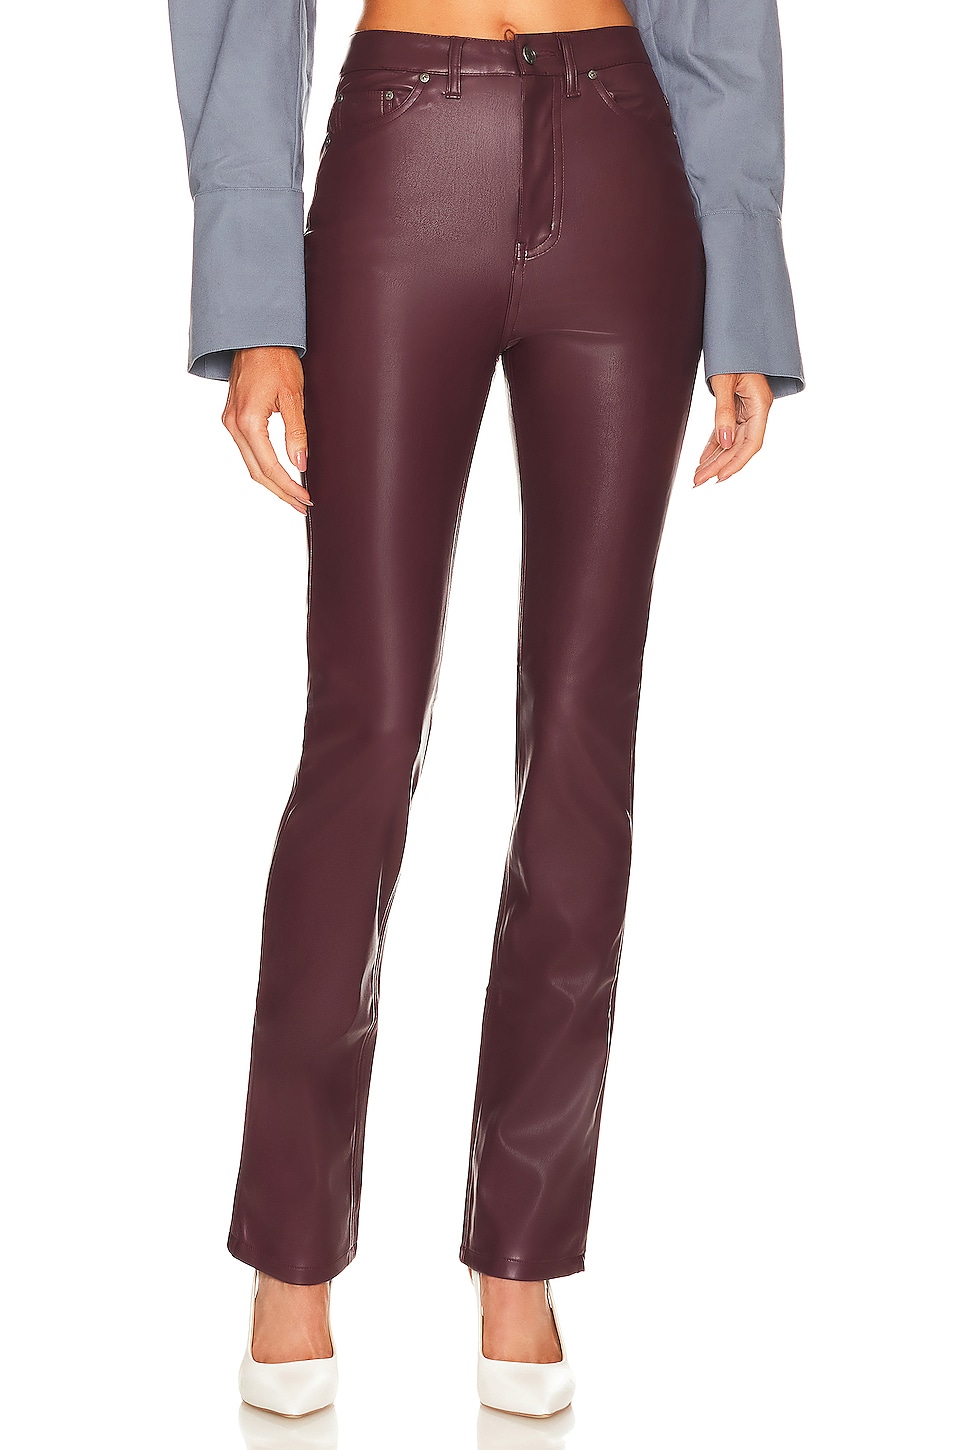 AFRM Heston Faux Leather Pant in Port Royale | REVOLVE